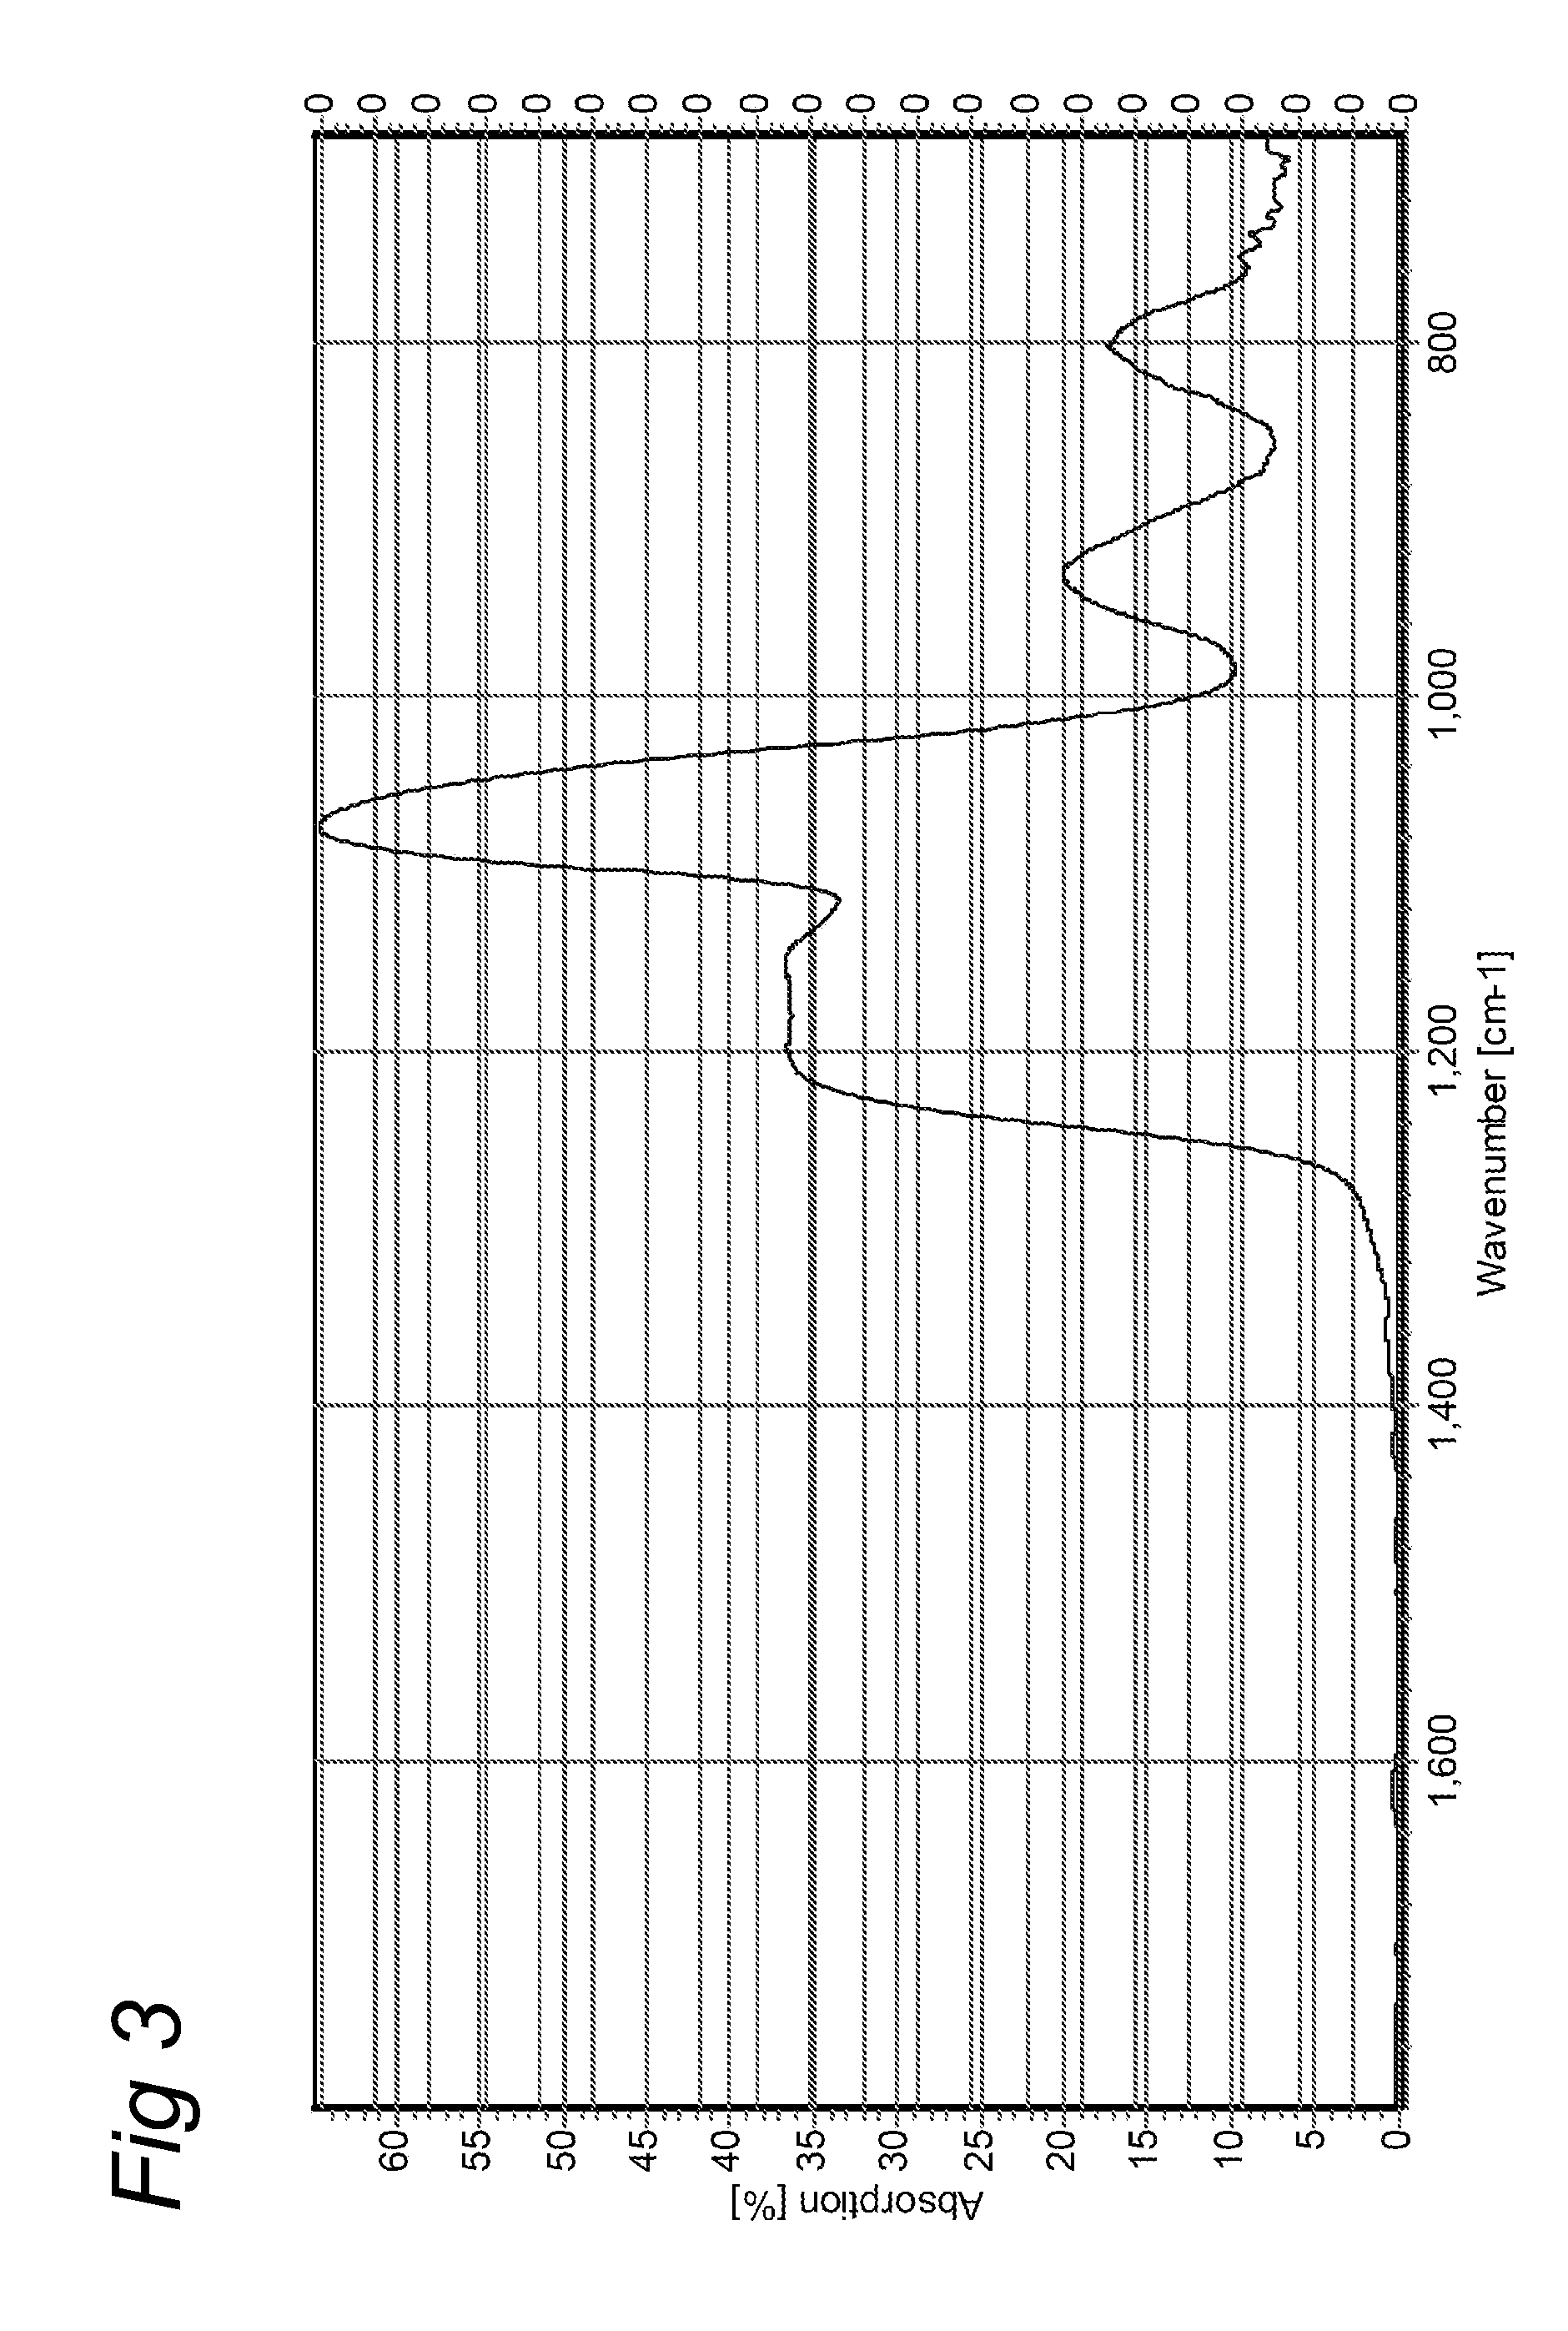 Method and apparatus for deposition using pulsed atmospheric pressure glow discharge